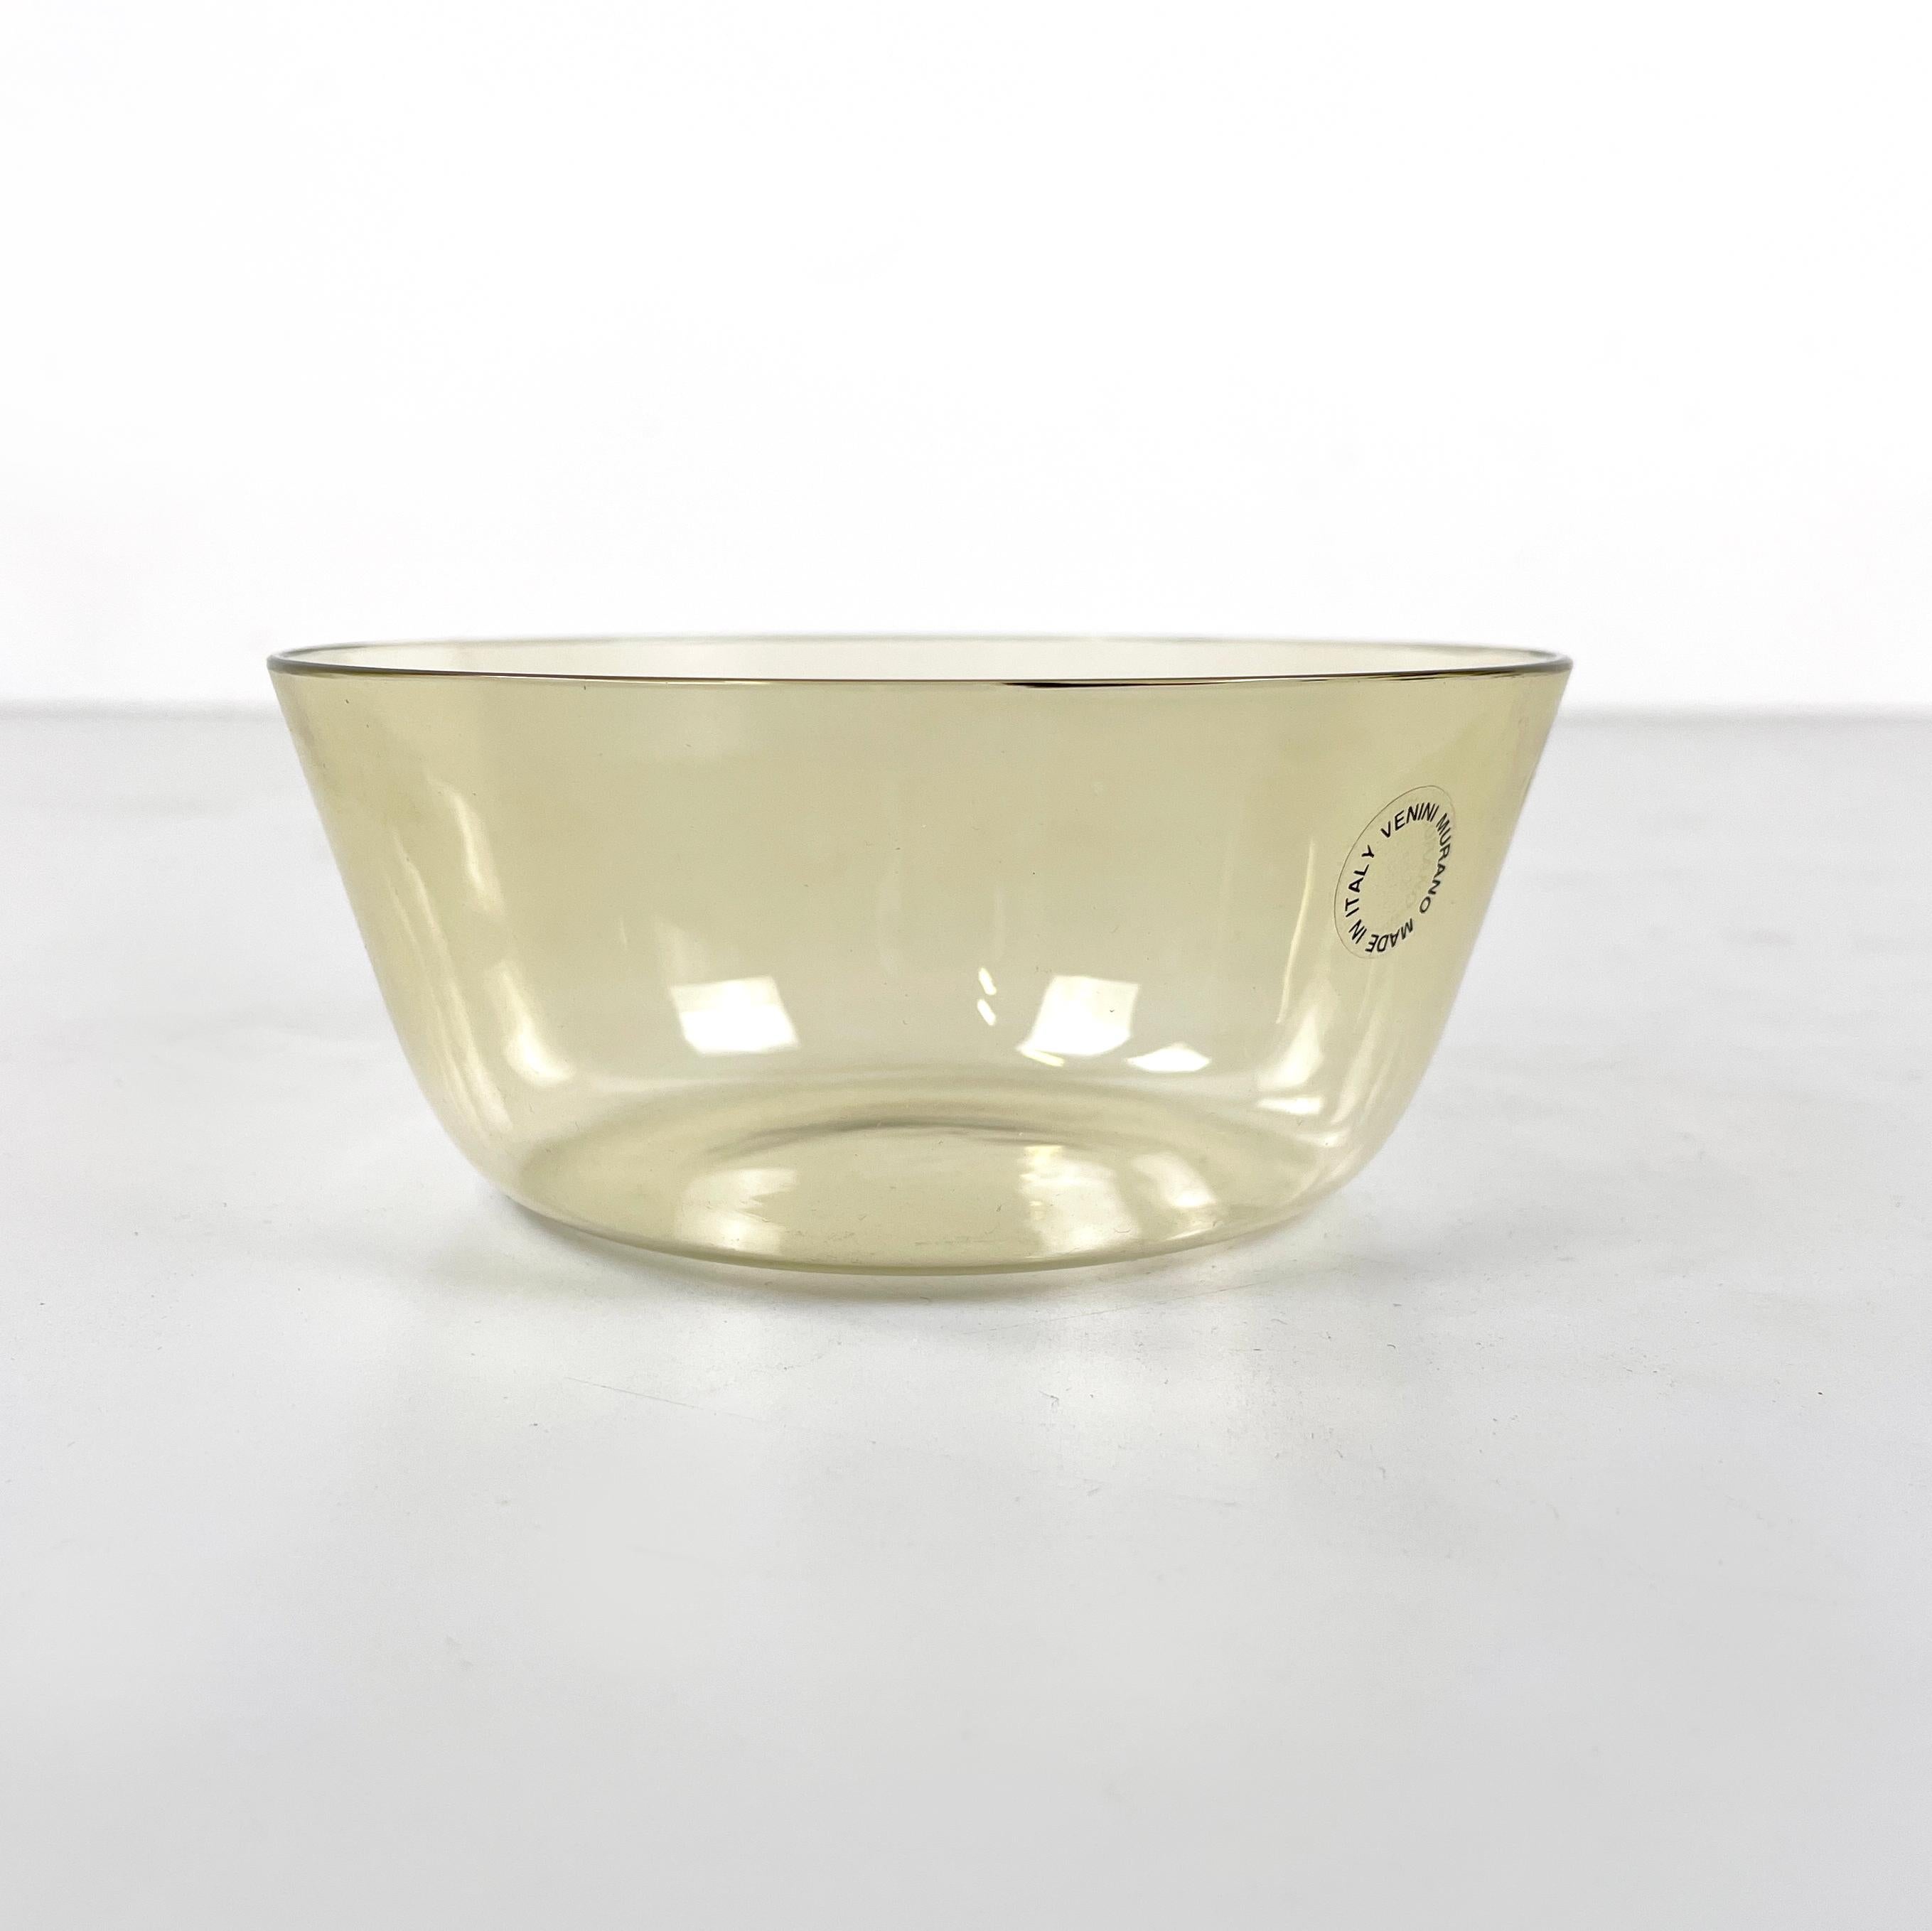 Italian modern Decorative bowl in transparent yellow Murano glass by Venini, 1990s
Decorative bowl with a round base in transparent yellow Murano glass. Perfect as a centerpiece or pocket emptier.
Produced by Venini in 1990. Label present.
Very good